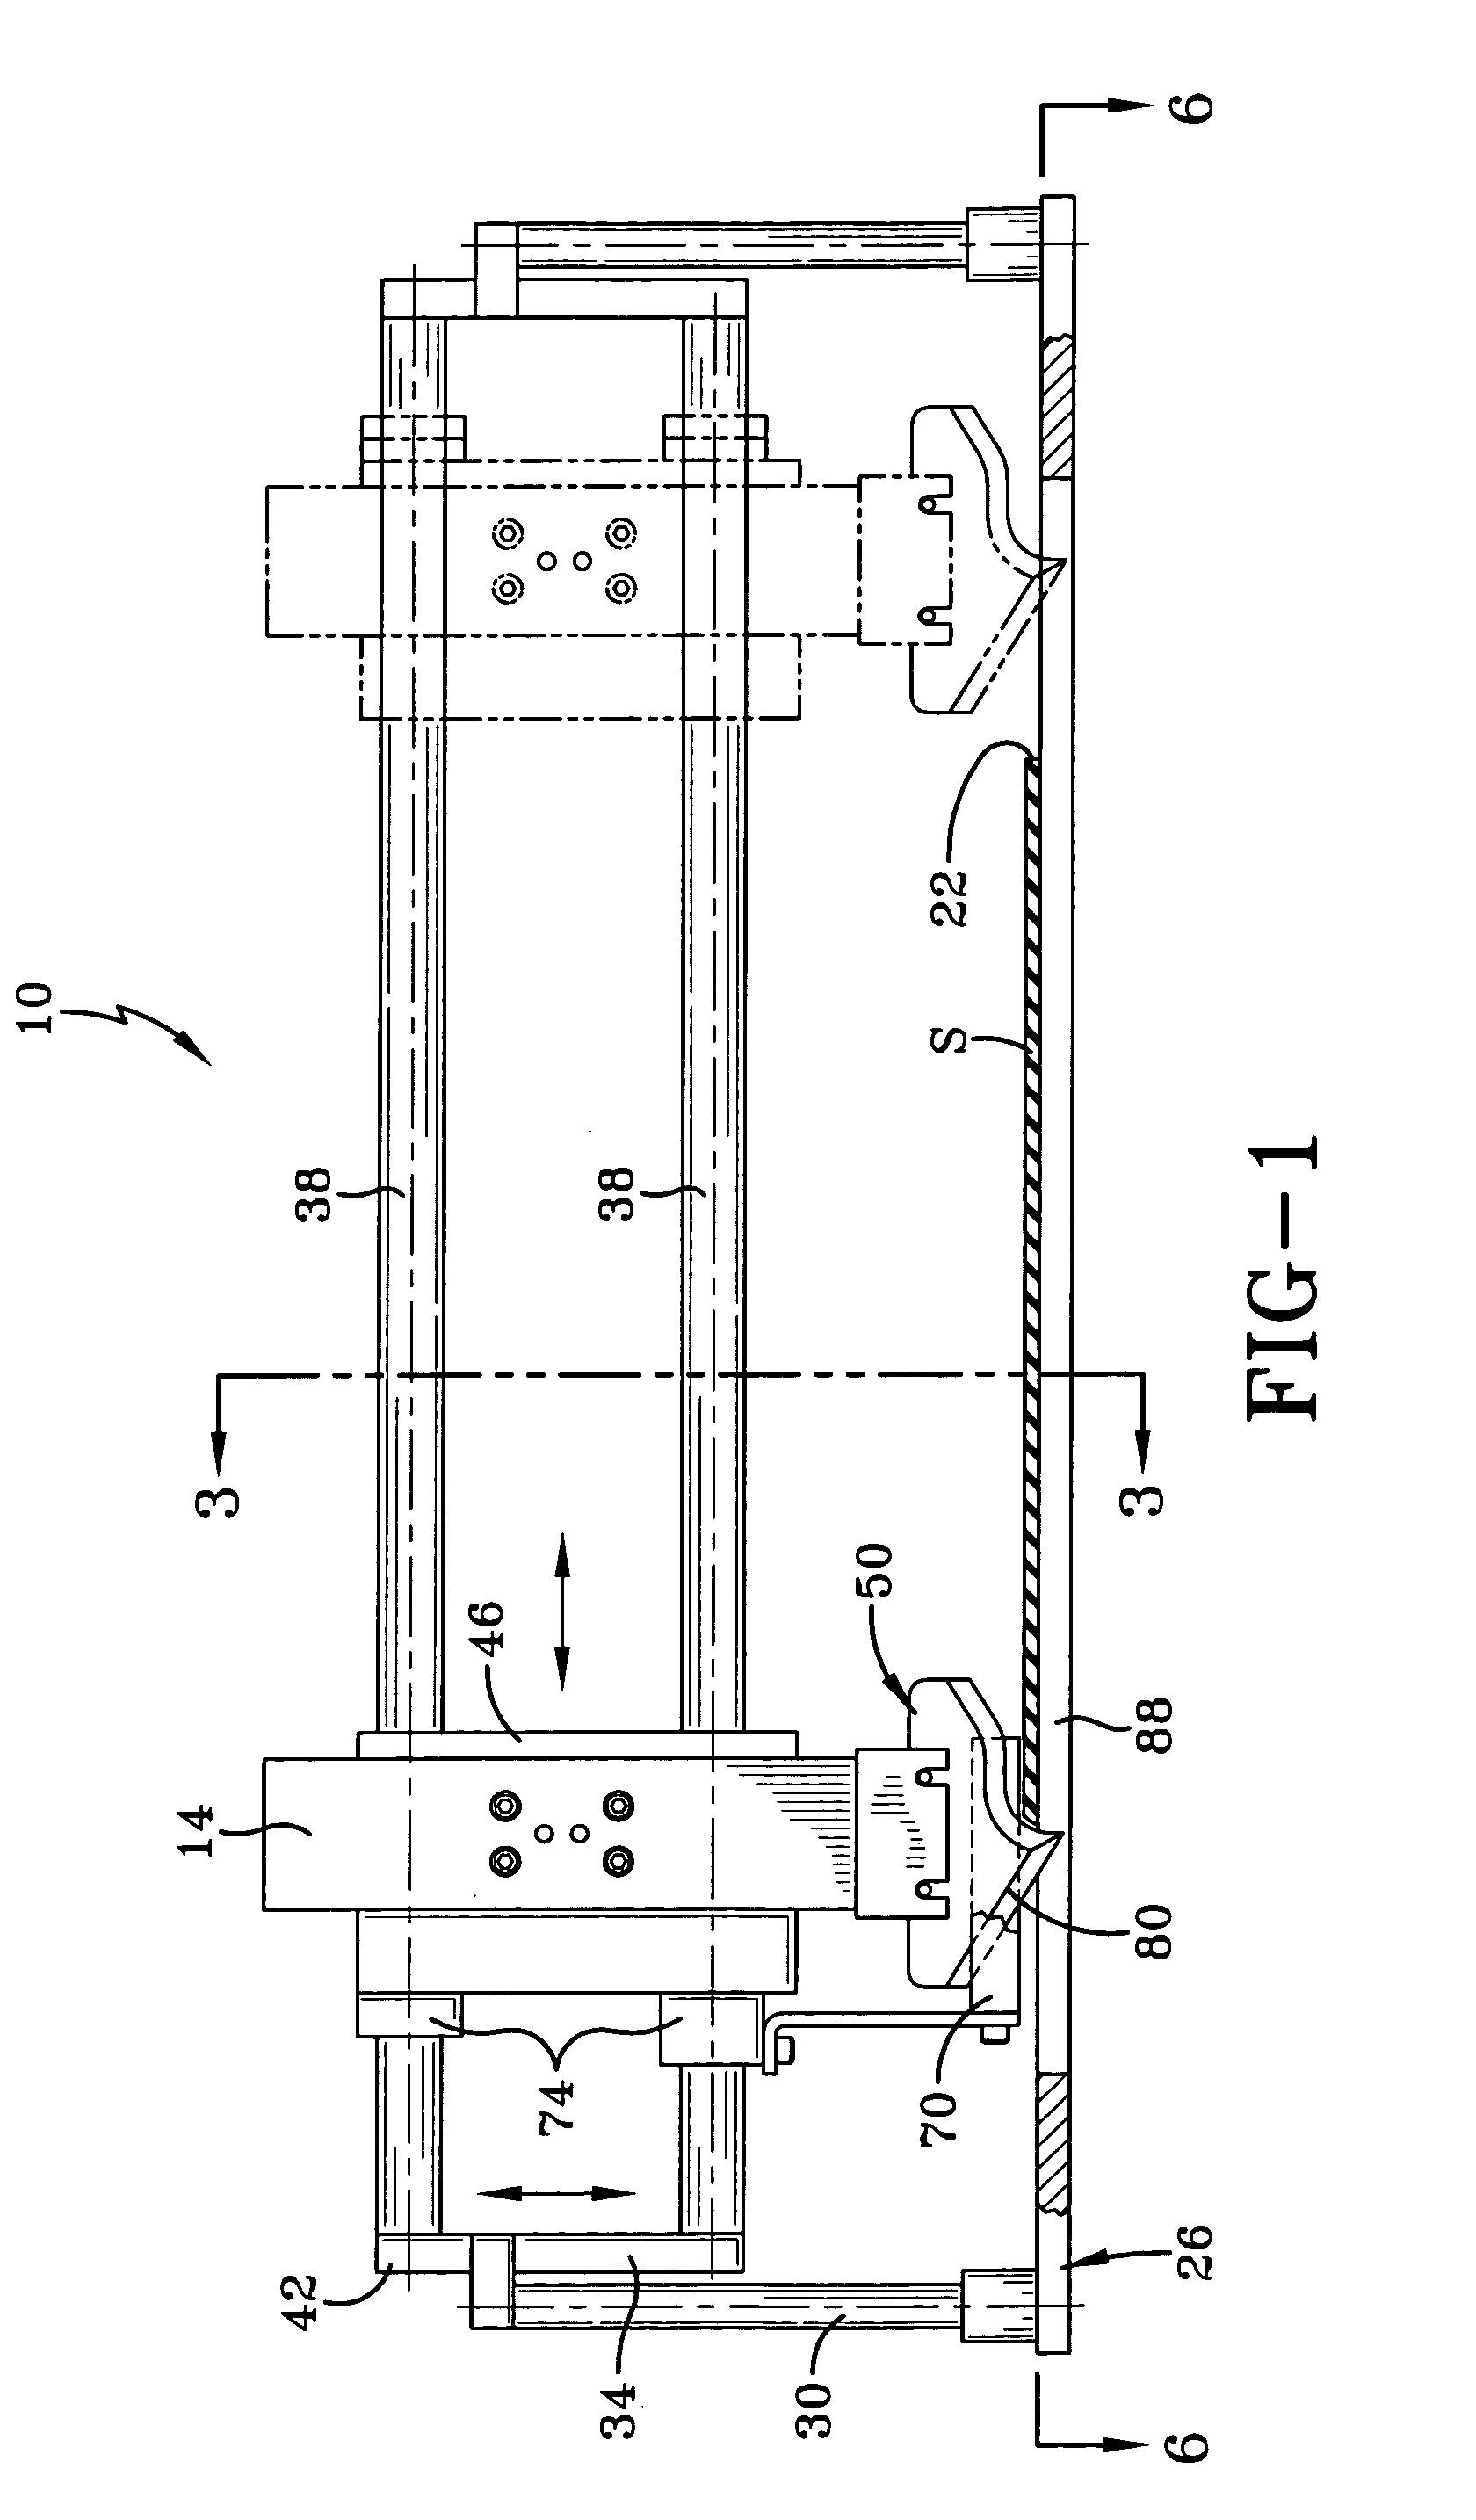 Method and apparatus for cutting tire ply stock